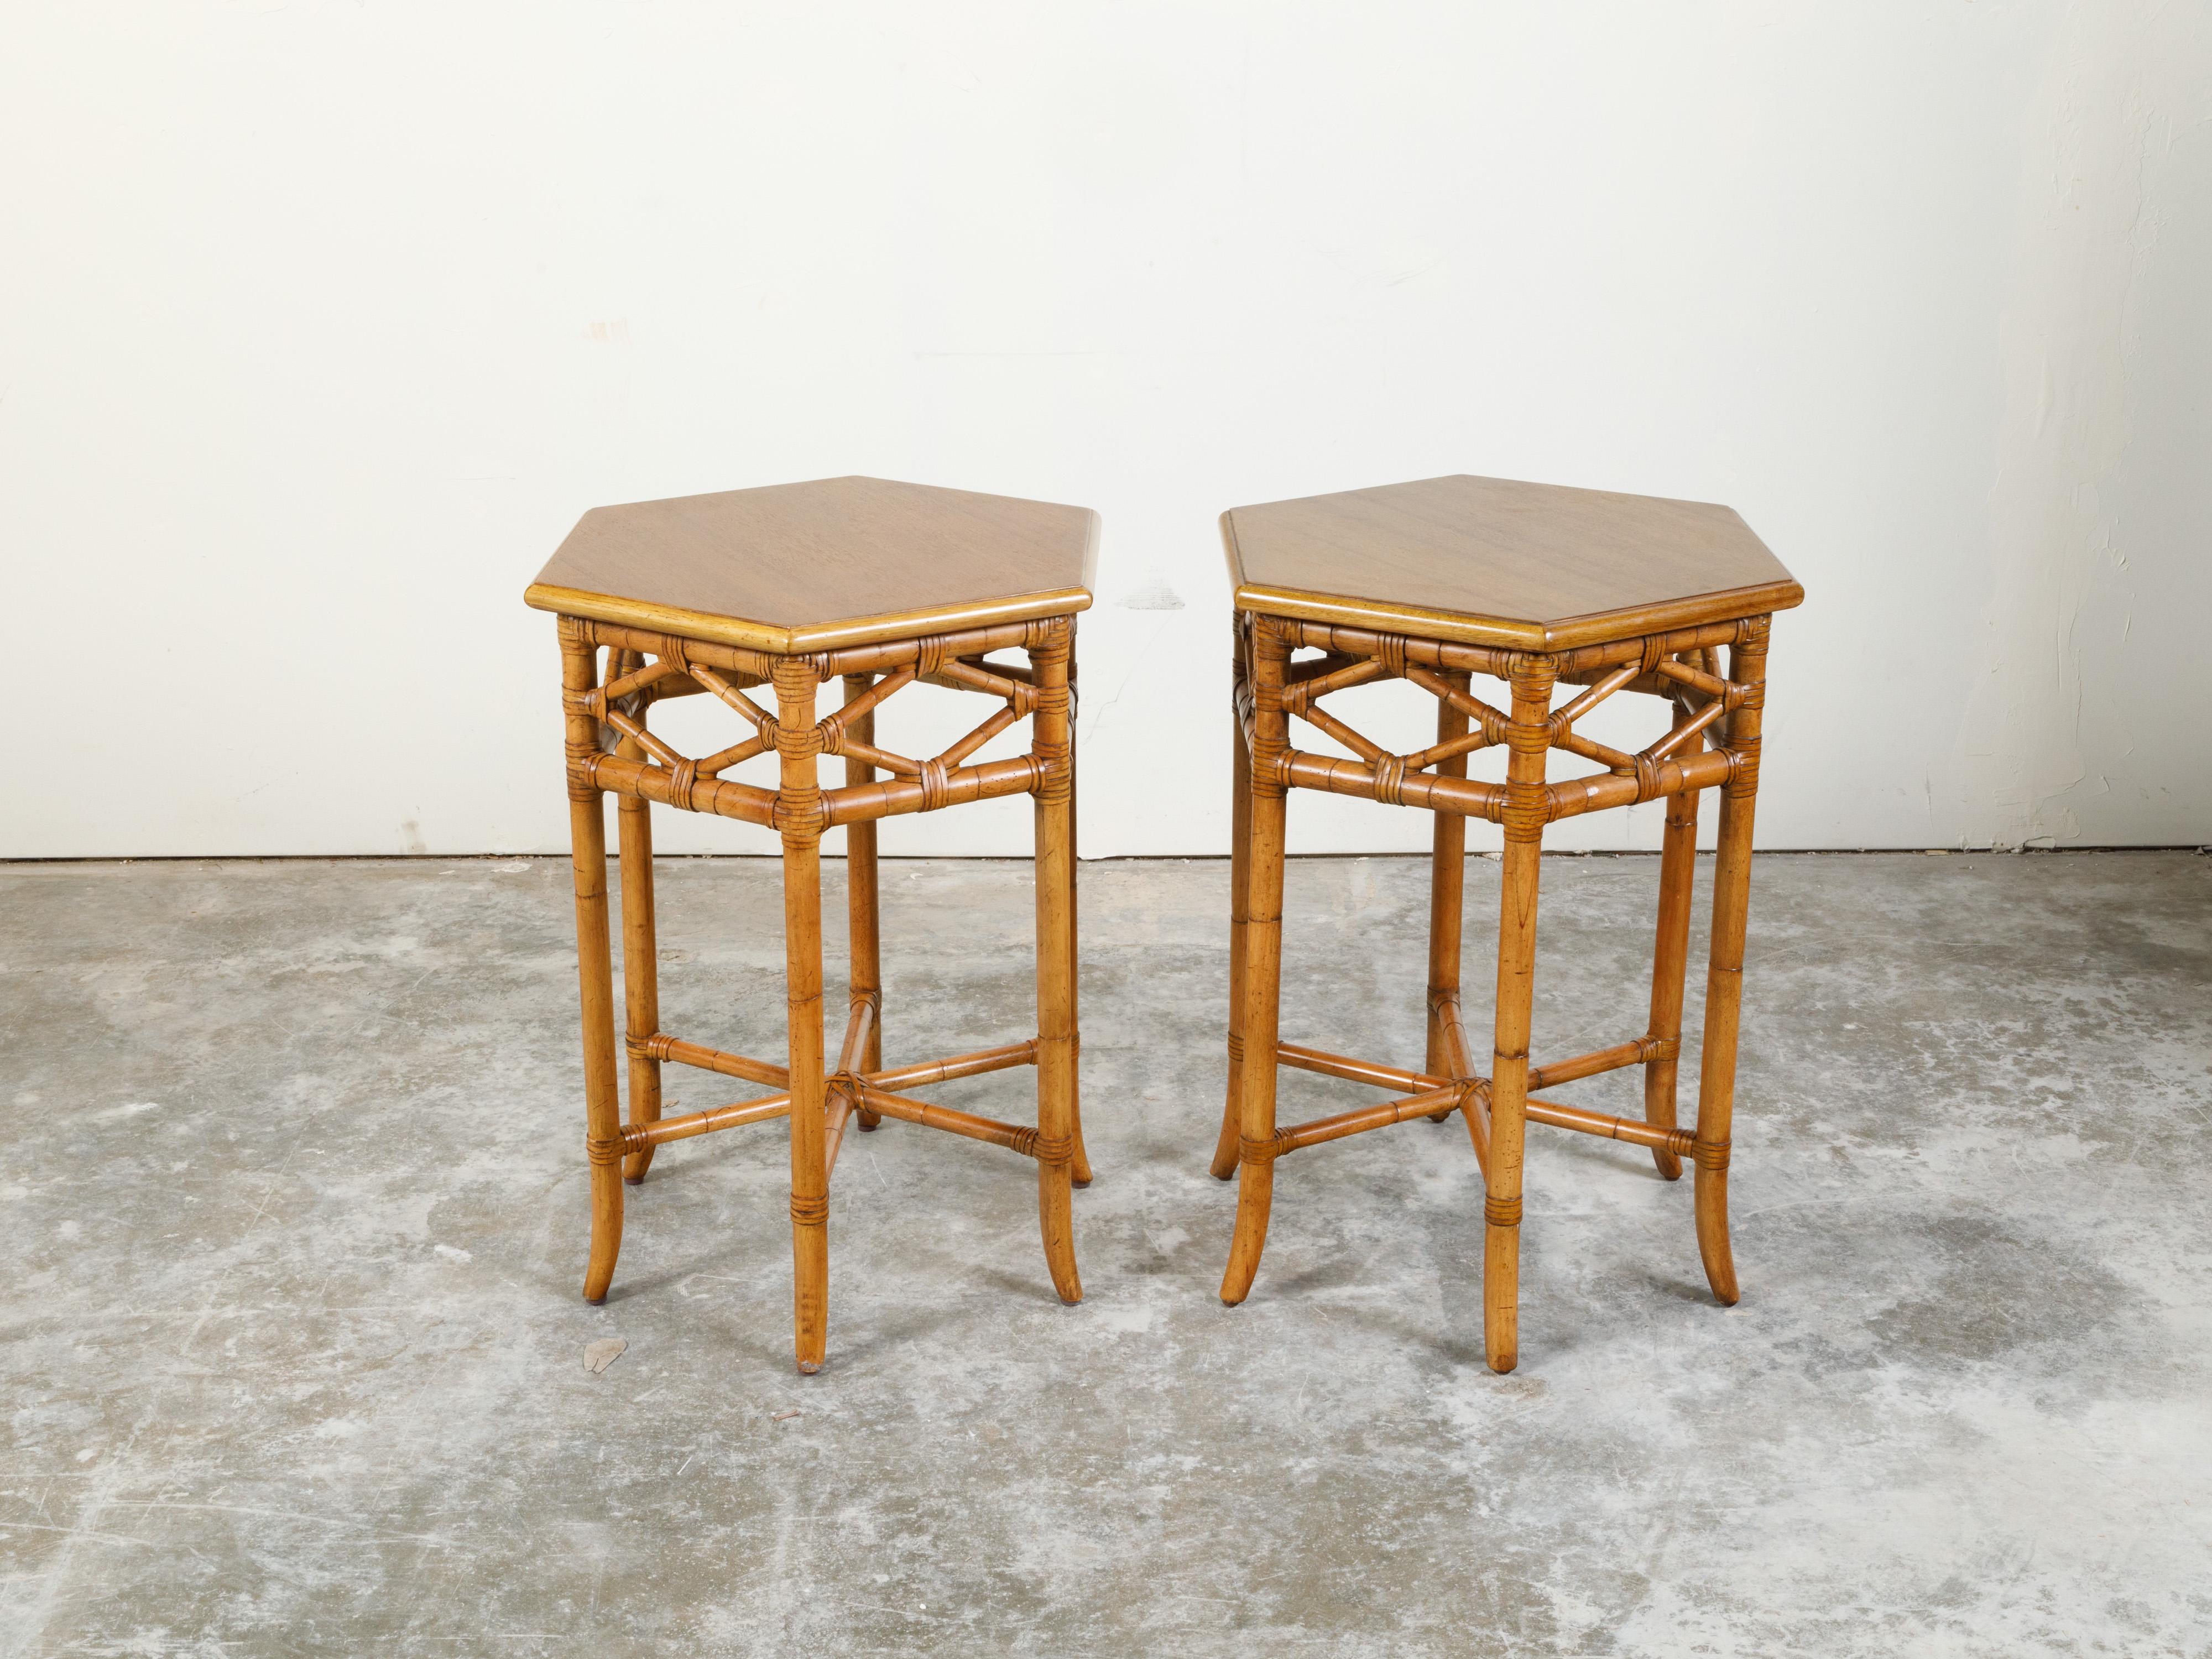 Pair of English Chinoiserie Style Faux Bamboo Side Tables with Hexagonal Tops 1